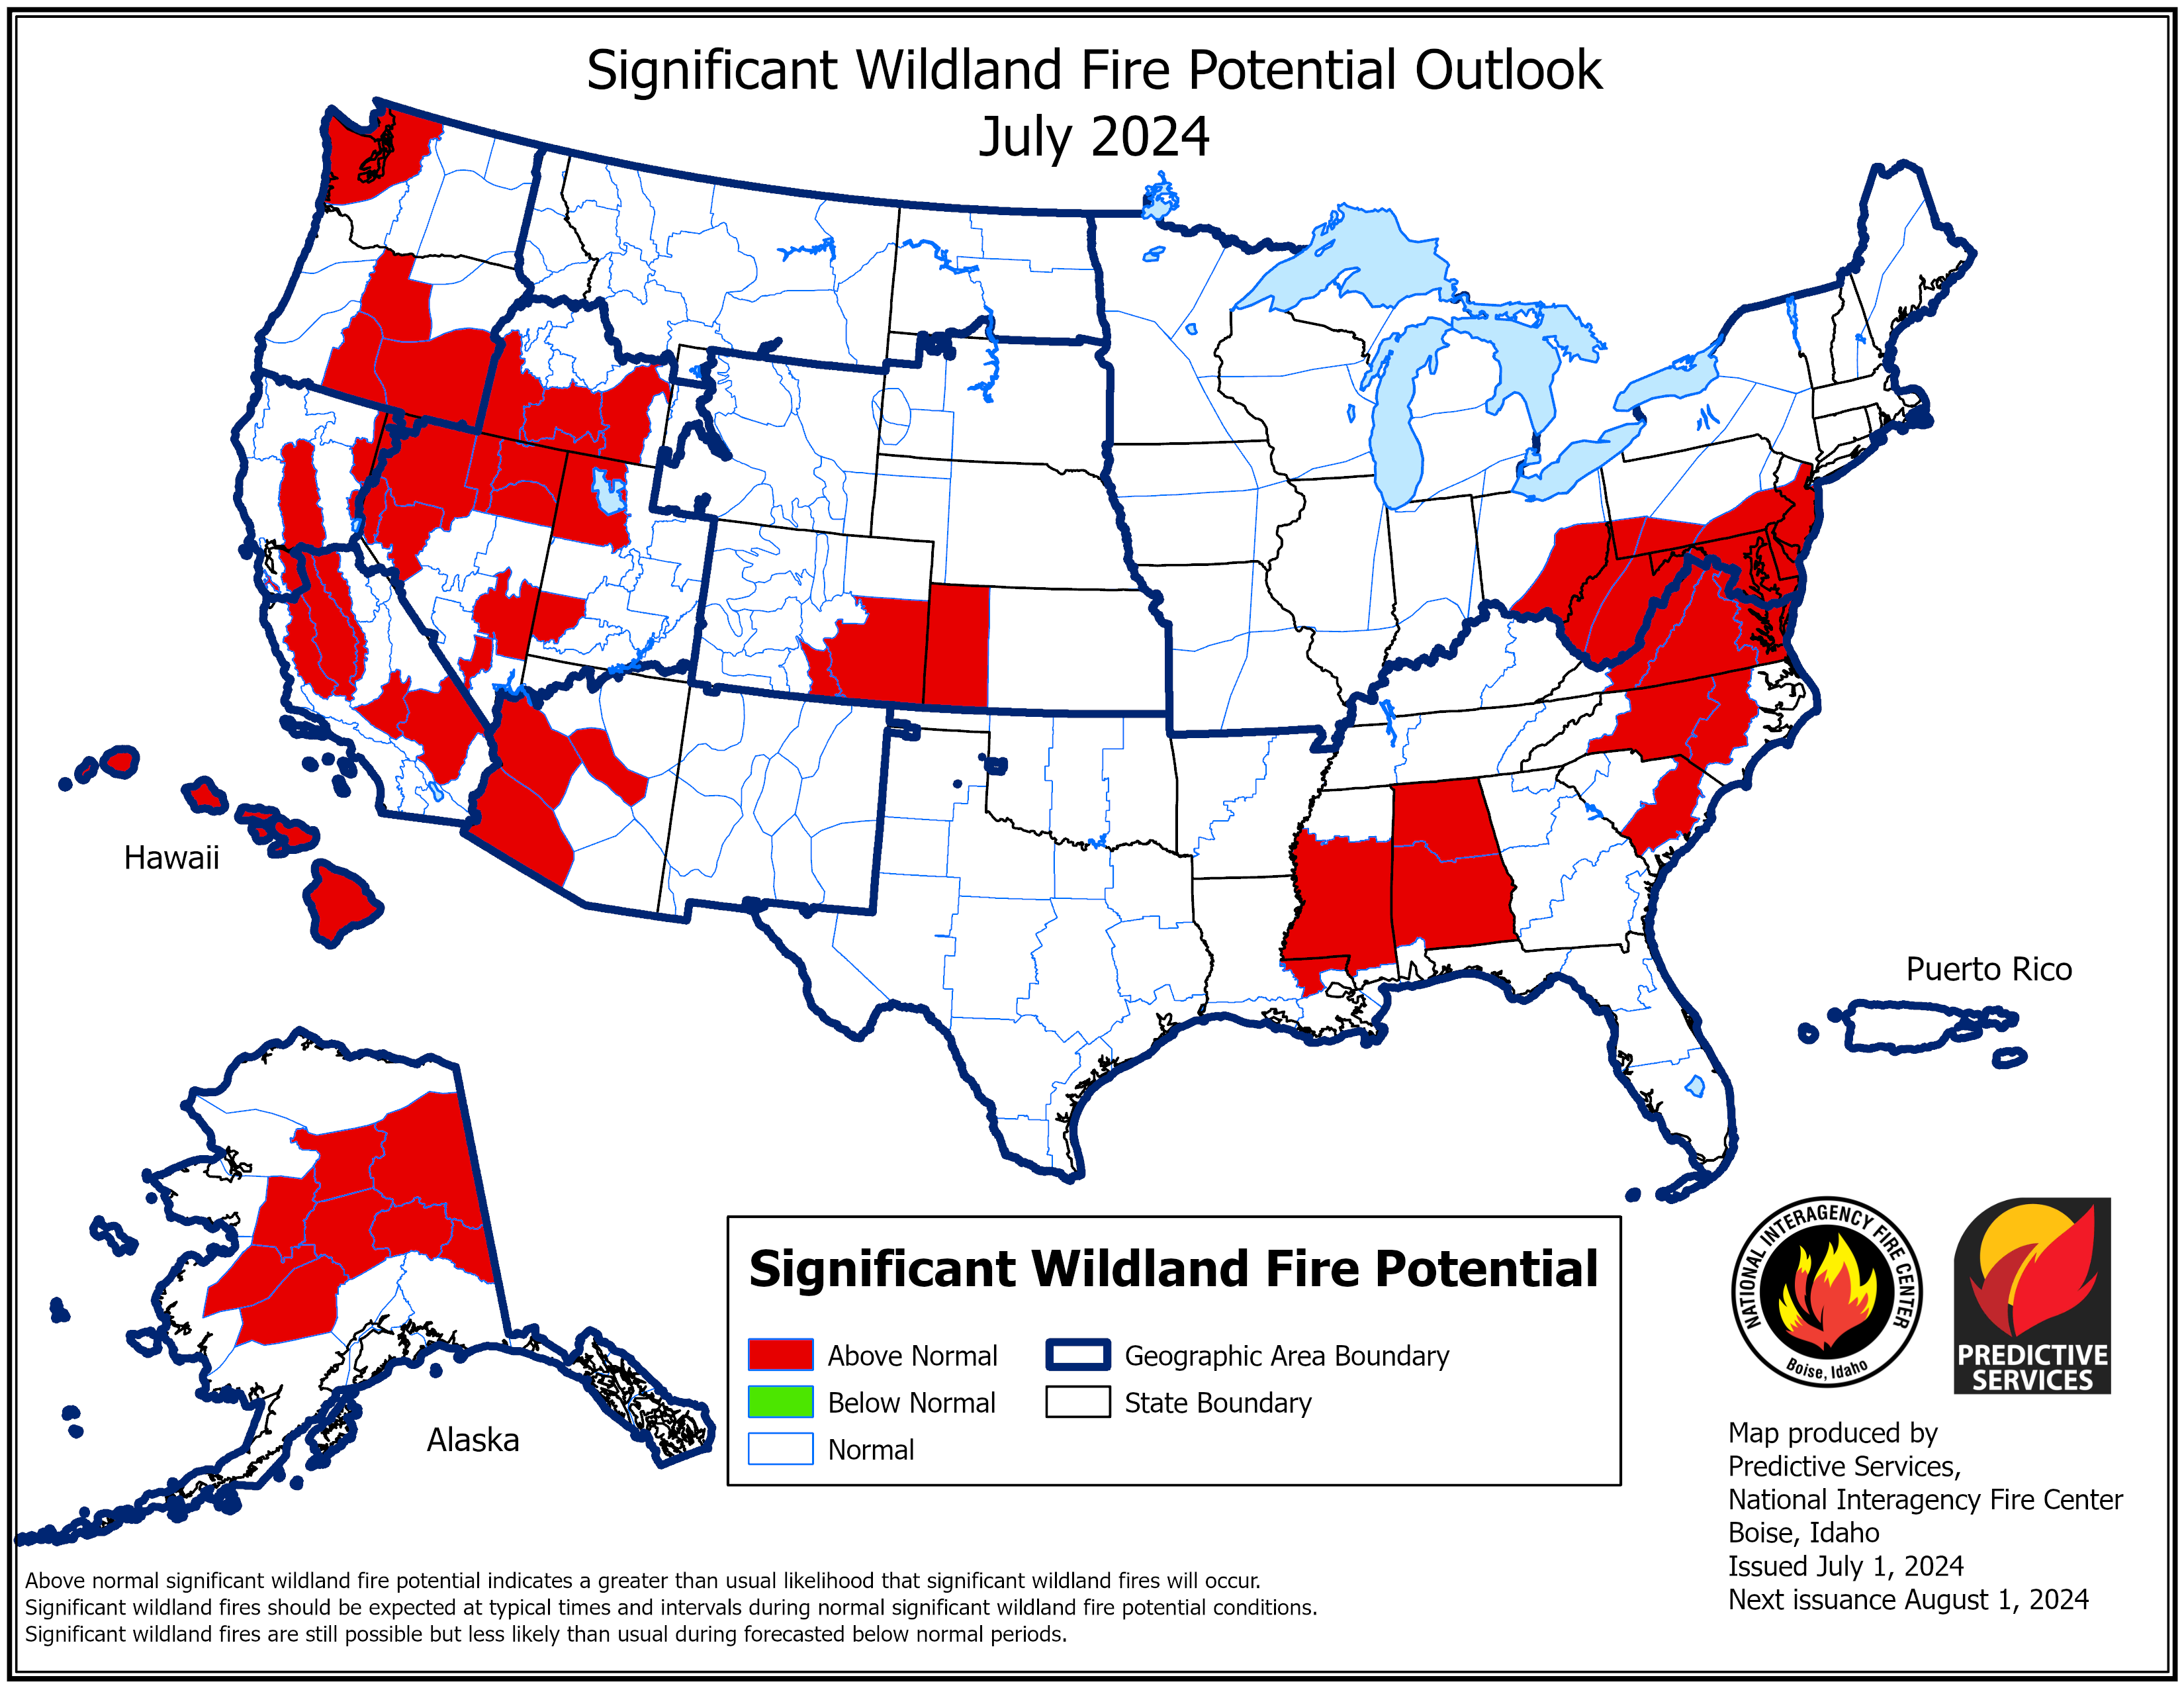 Significant Fire Potential Outlook Image for July